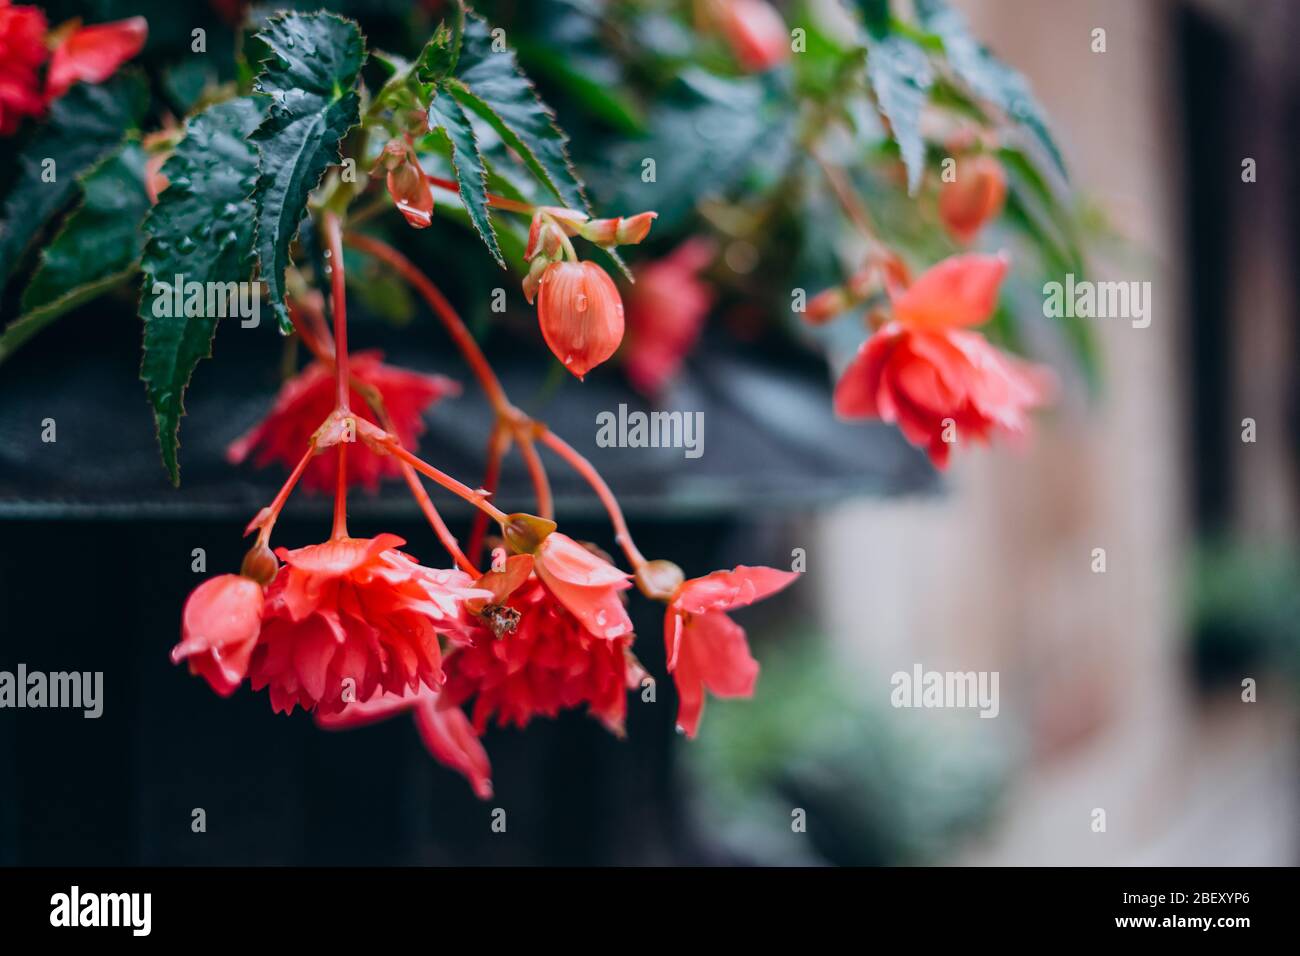 Beautiful Red Flowers On City Background Floral Scenery With Red Flowers On The Street Pink Flowers In Flowerpots In The City Center Stock Photo Alamy,What A Beautiful Name Piano Chords Key Of C